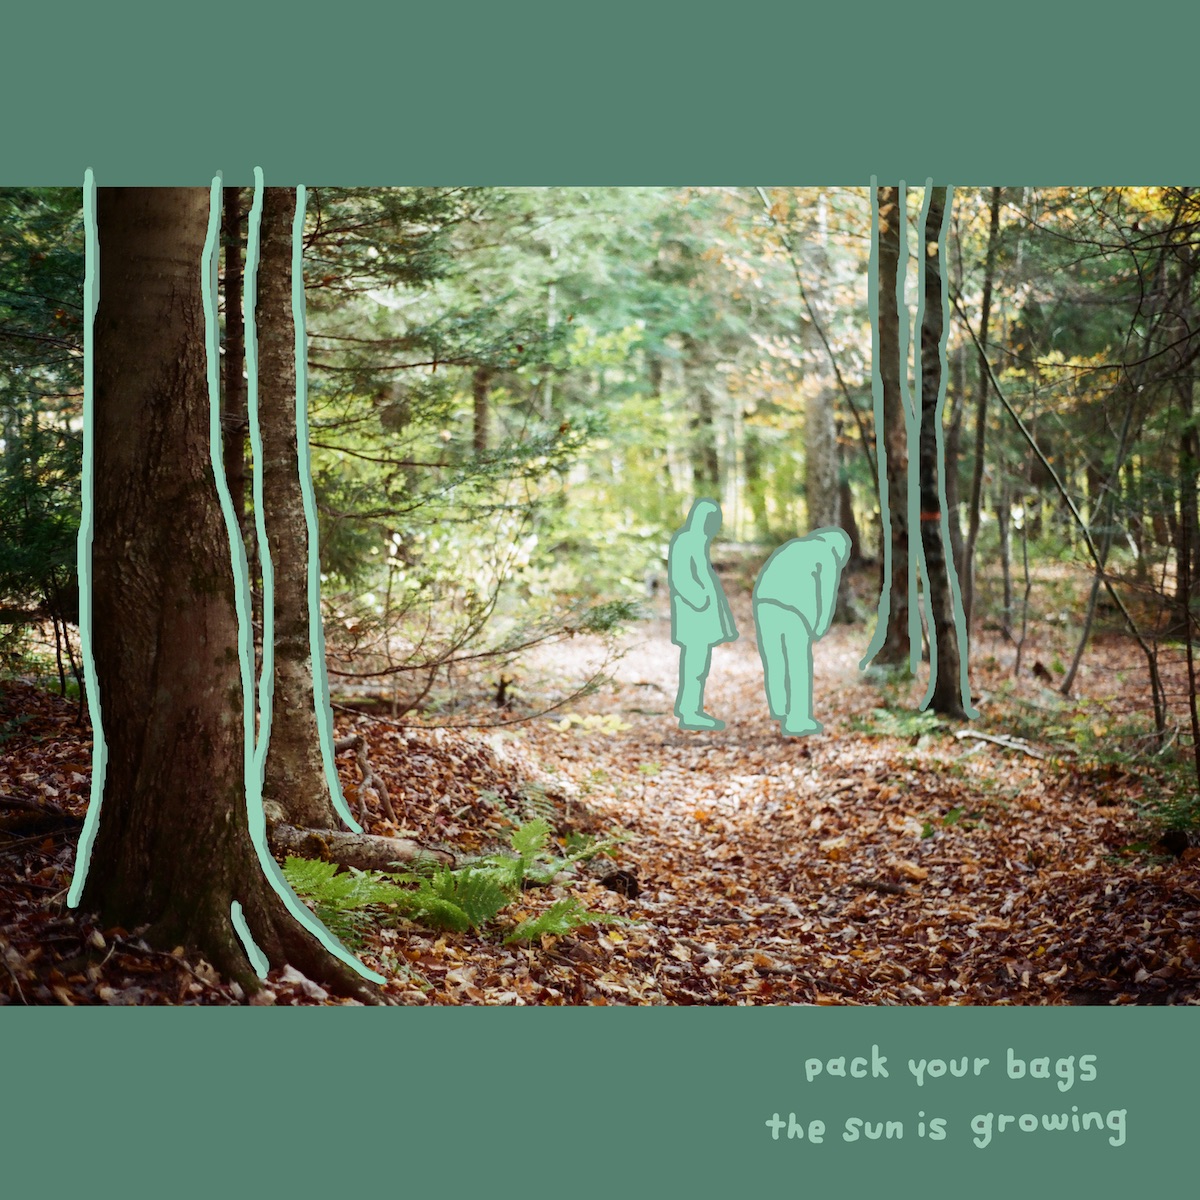 ALBUM REVIEW: pack your bags the sun is growing by bedbug